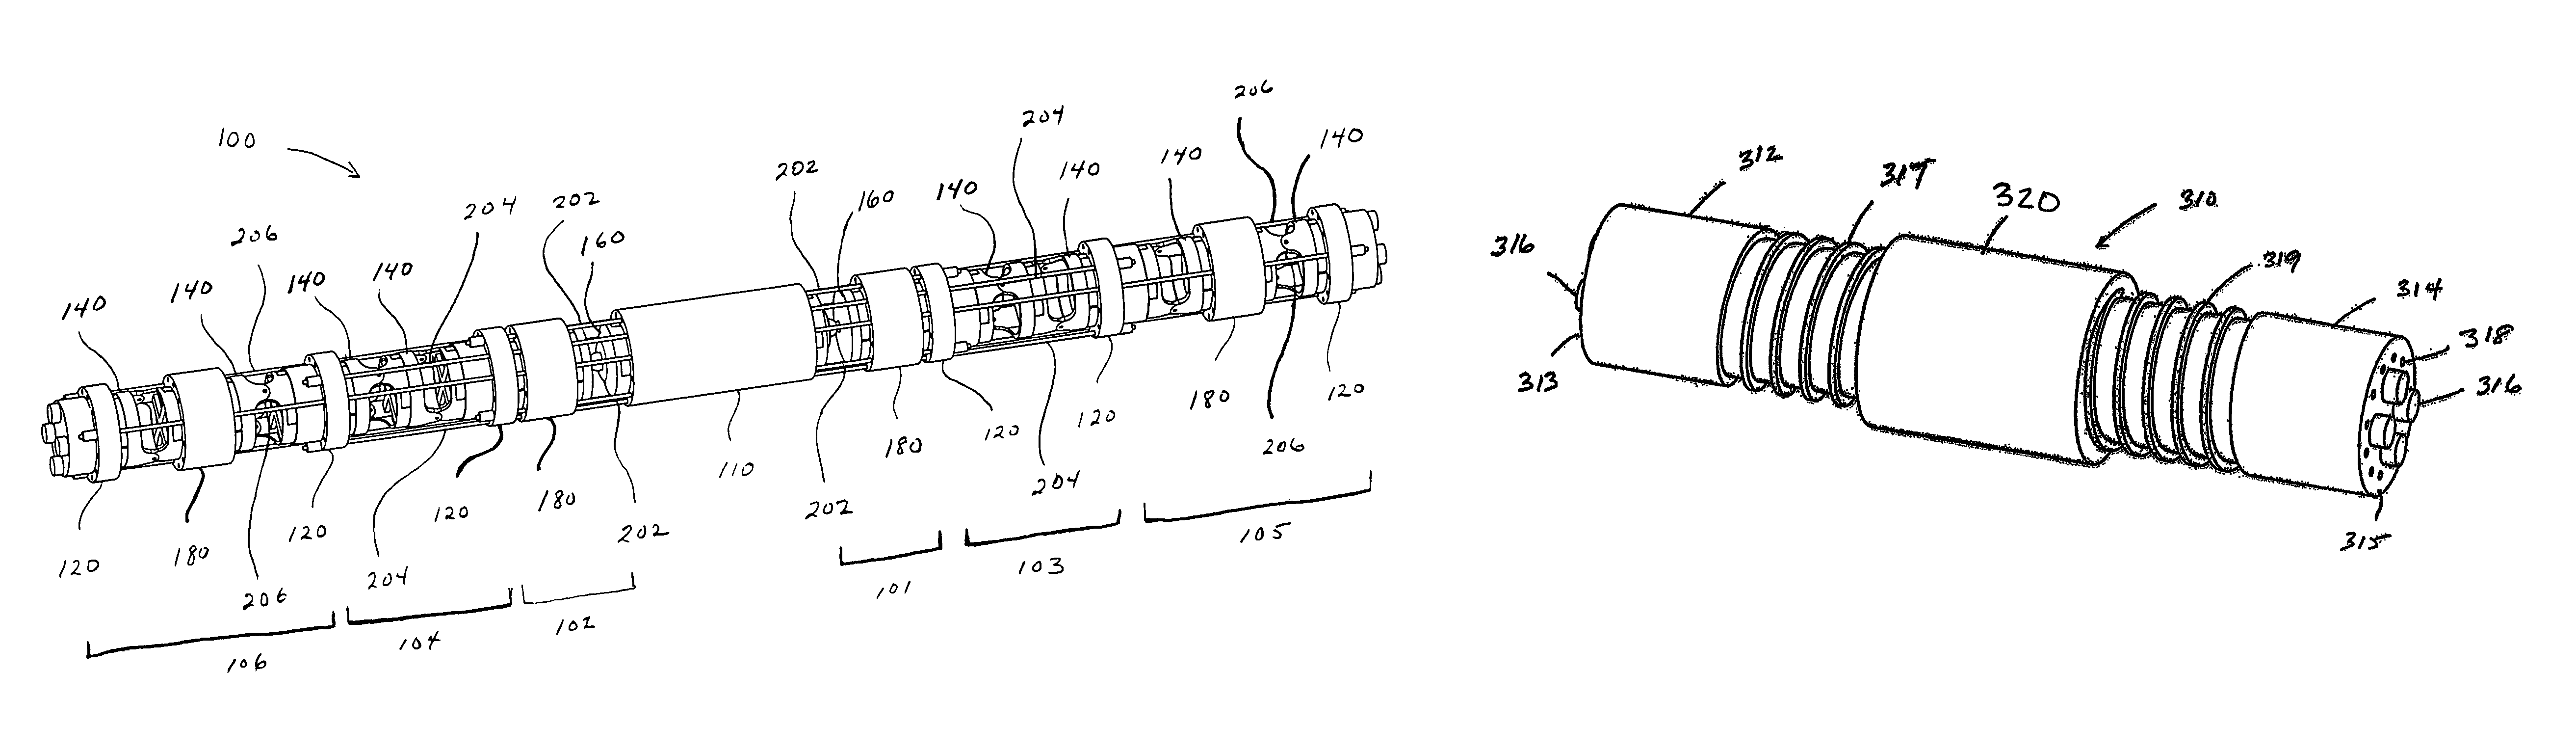 Articulating mechanism components and system for easy assembly and disassembly